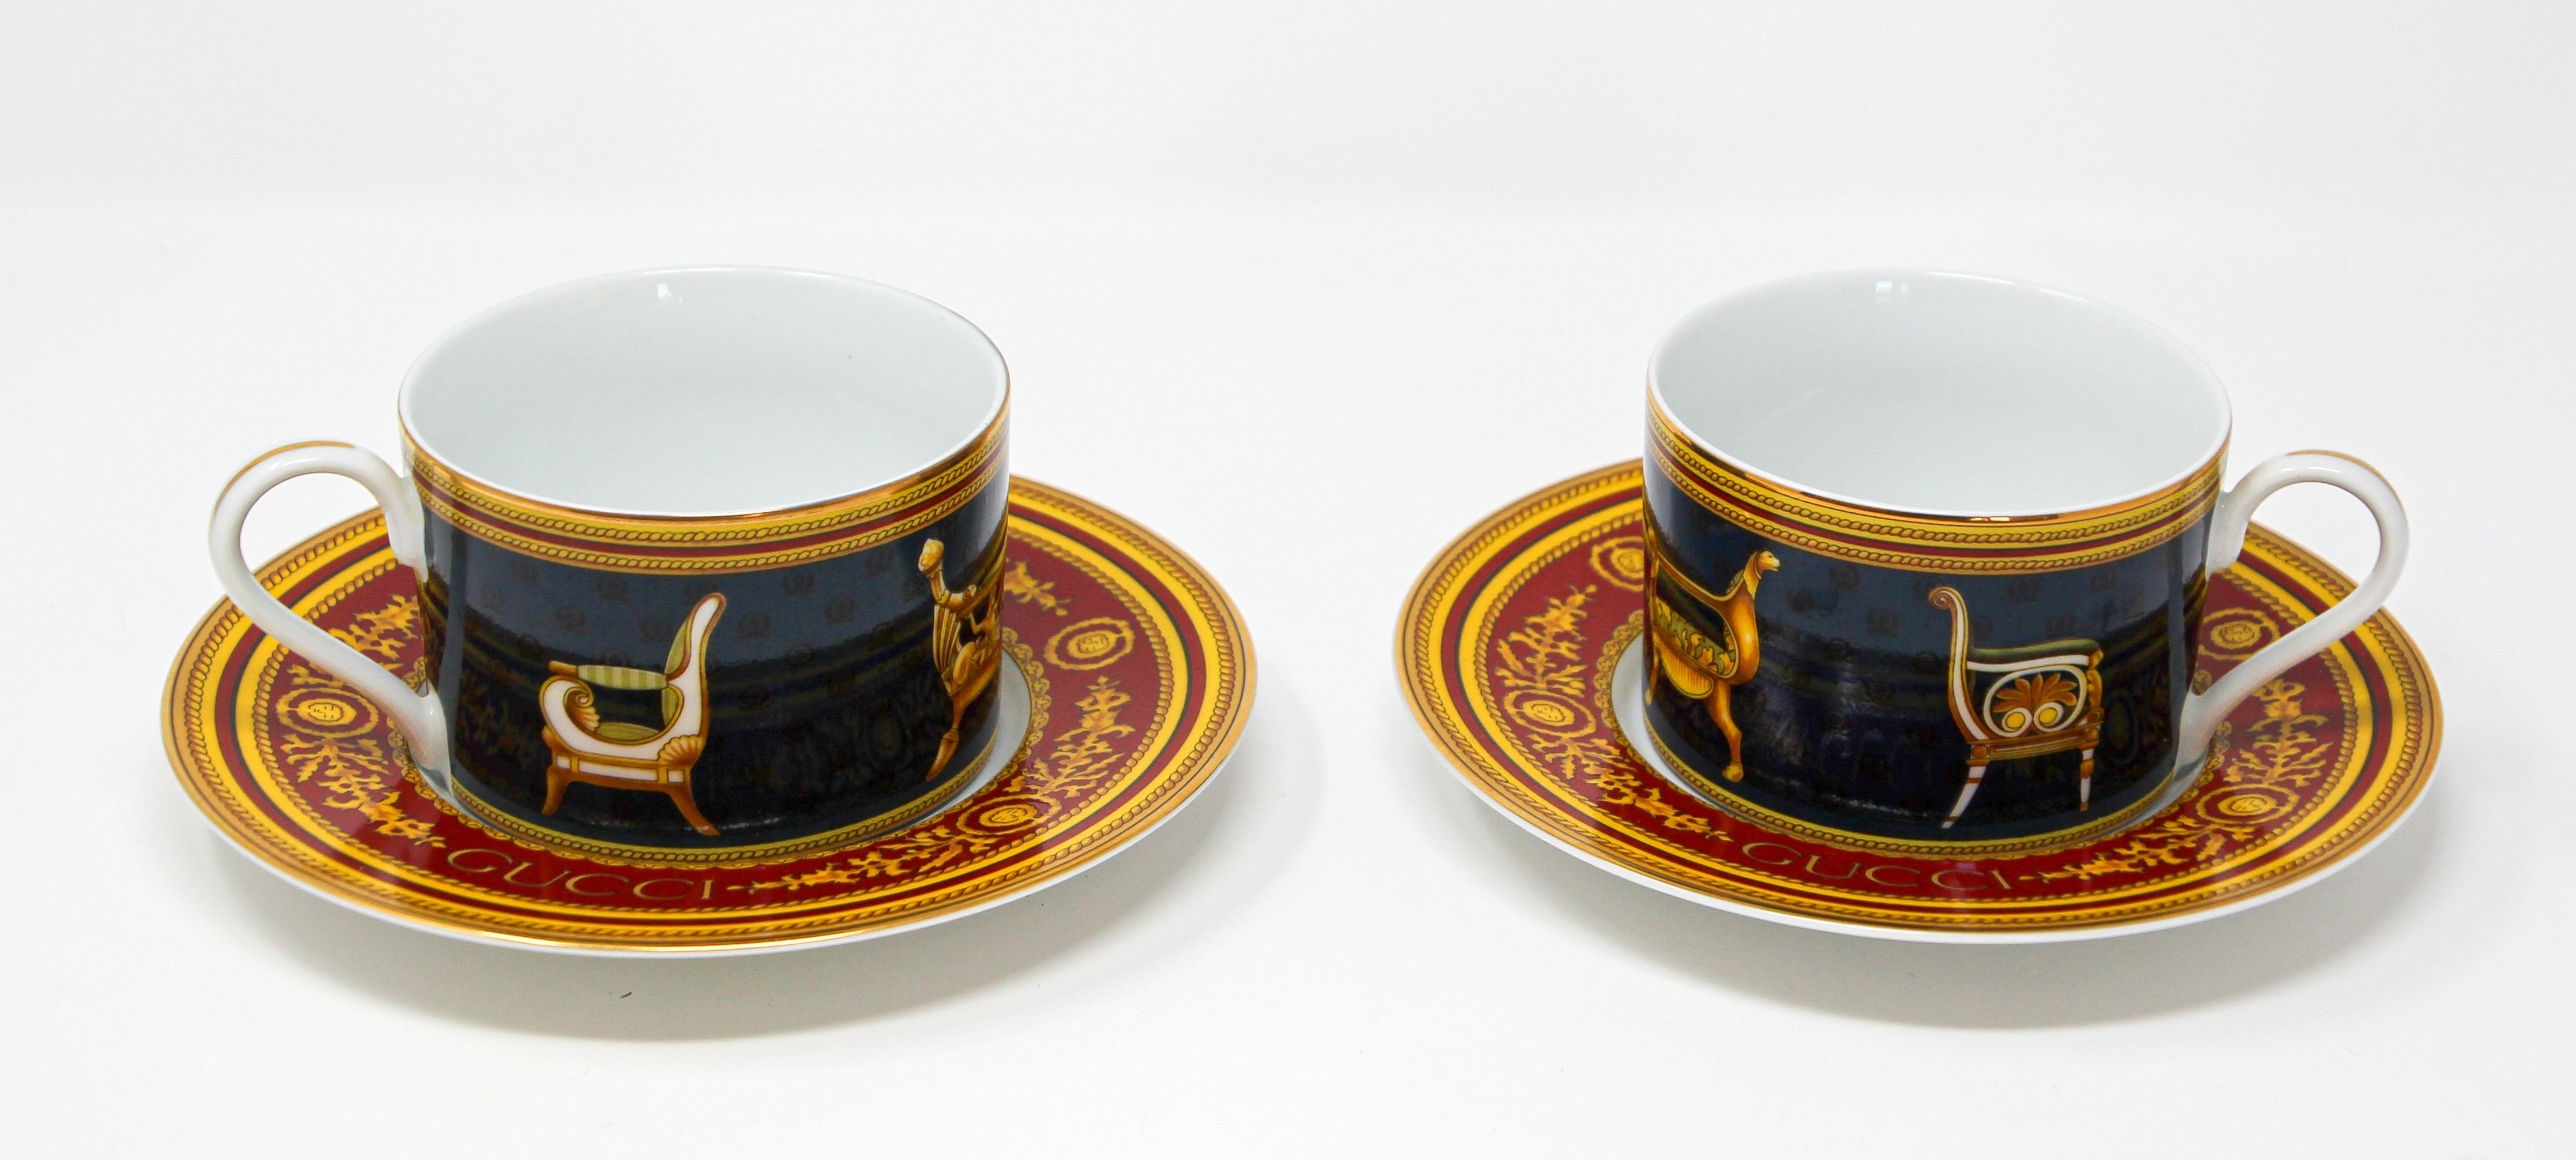 Gucci Porcelain Tea Cups and Saucers Set of 2 10